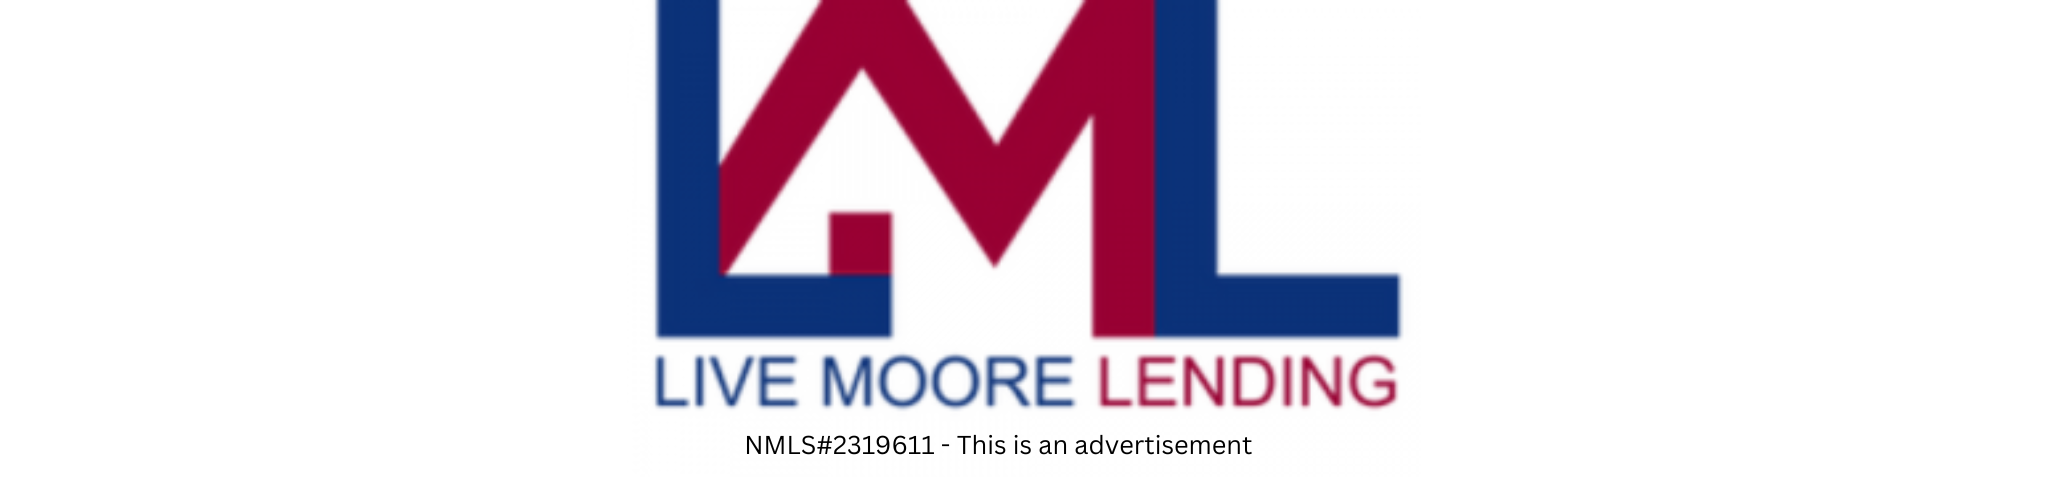 2319611-lm-lending-This-is-an-advertisement-1